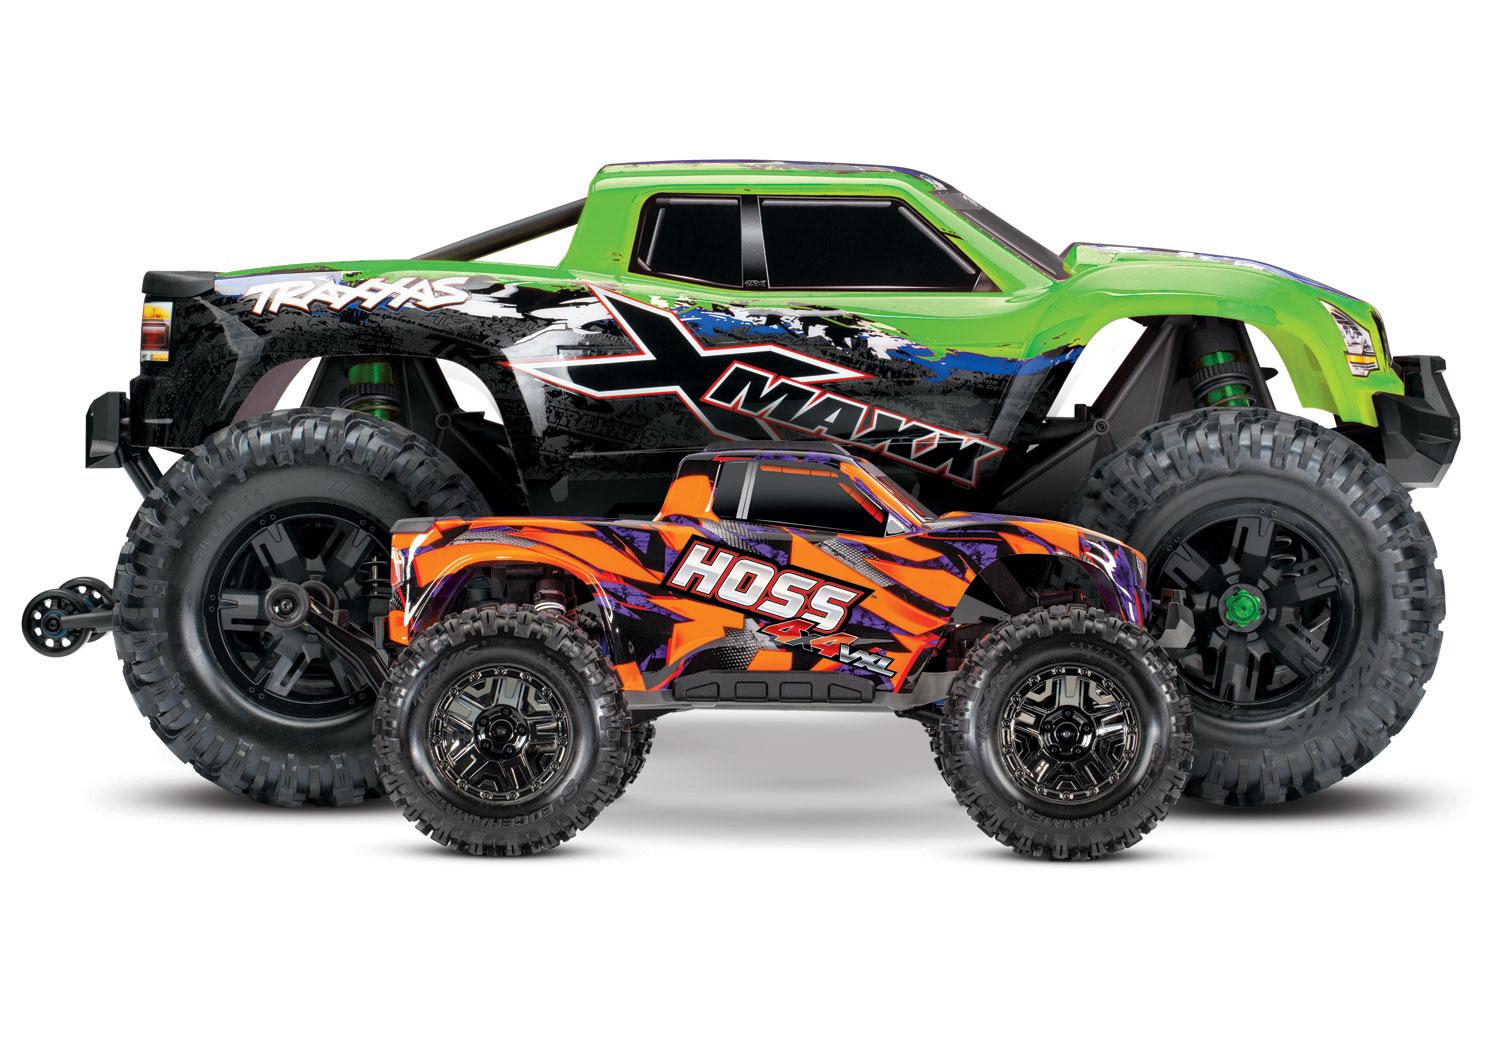 Petrol Rc: Petrol RC Cars: Thrilling Racing and Realistic Scale Modeling Options